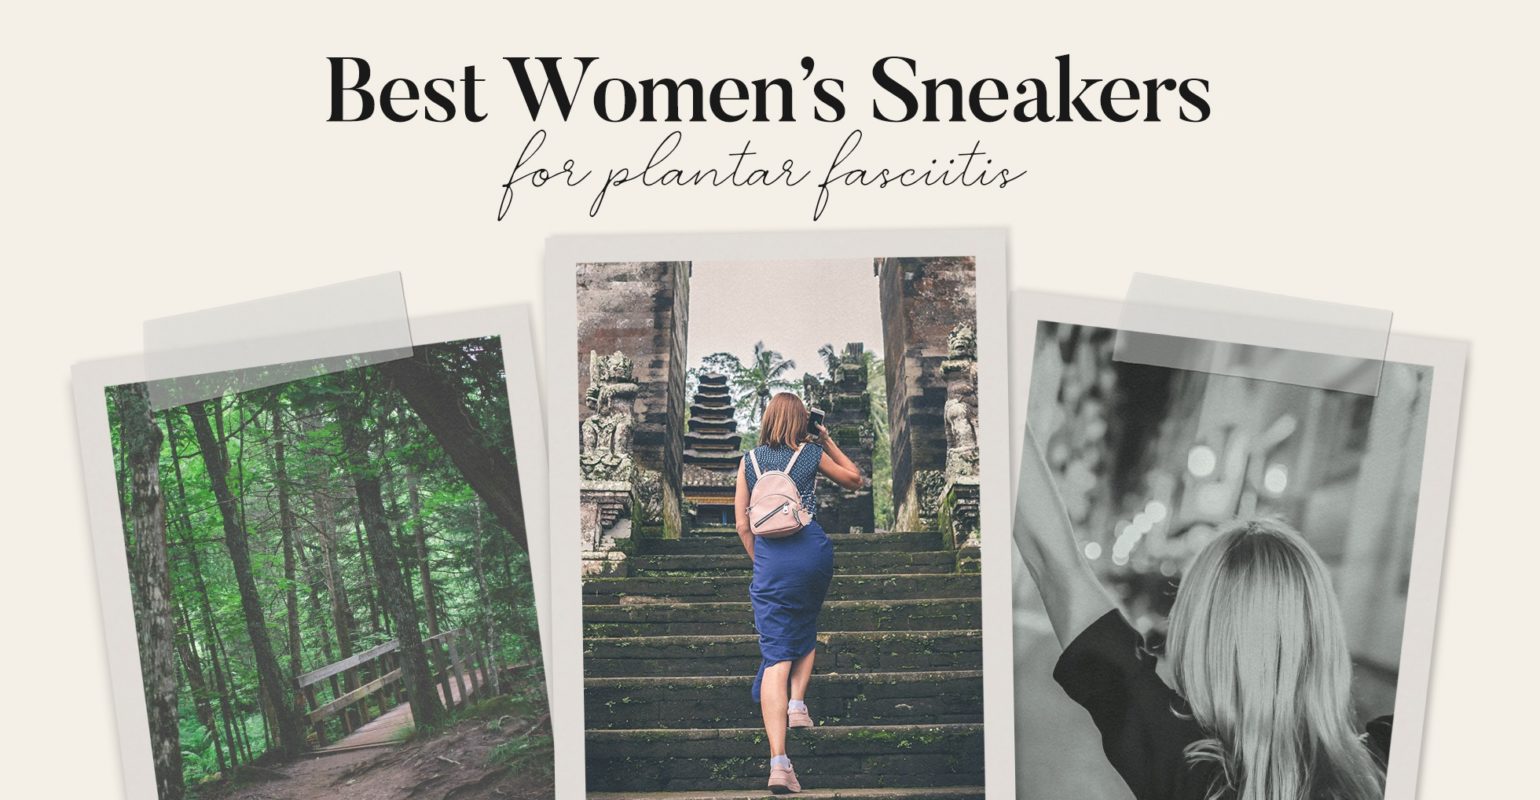 The Best Women’s Sneakers for Plantar Fasciitis (Review)